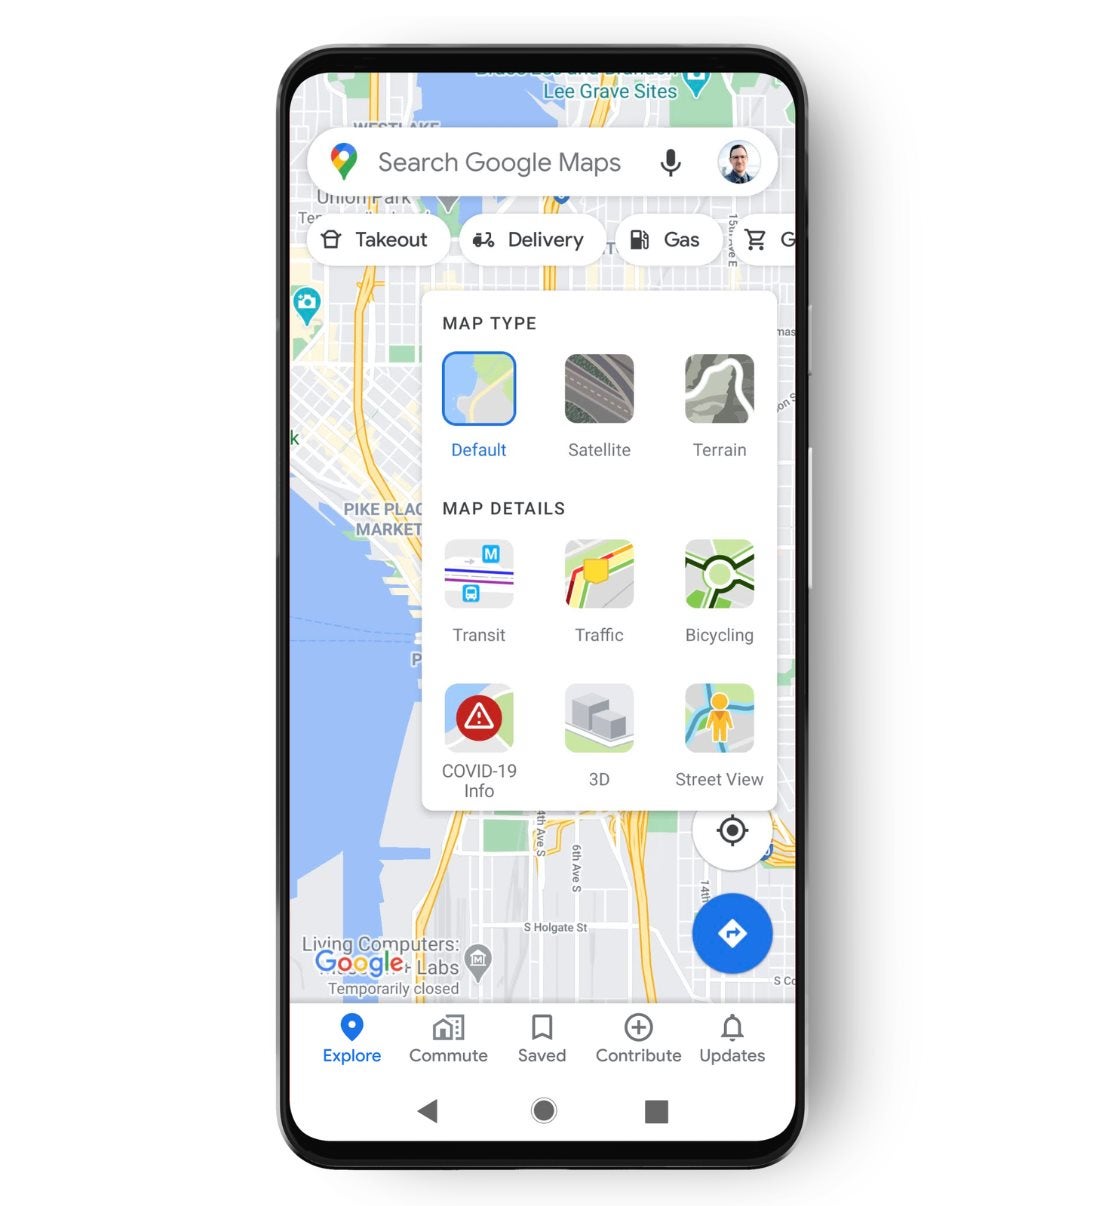 google maps gets another update on android new major feature announced 149144 1